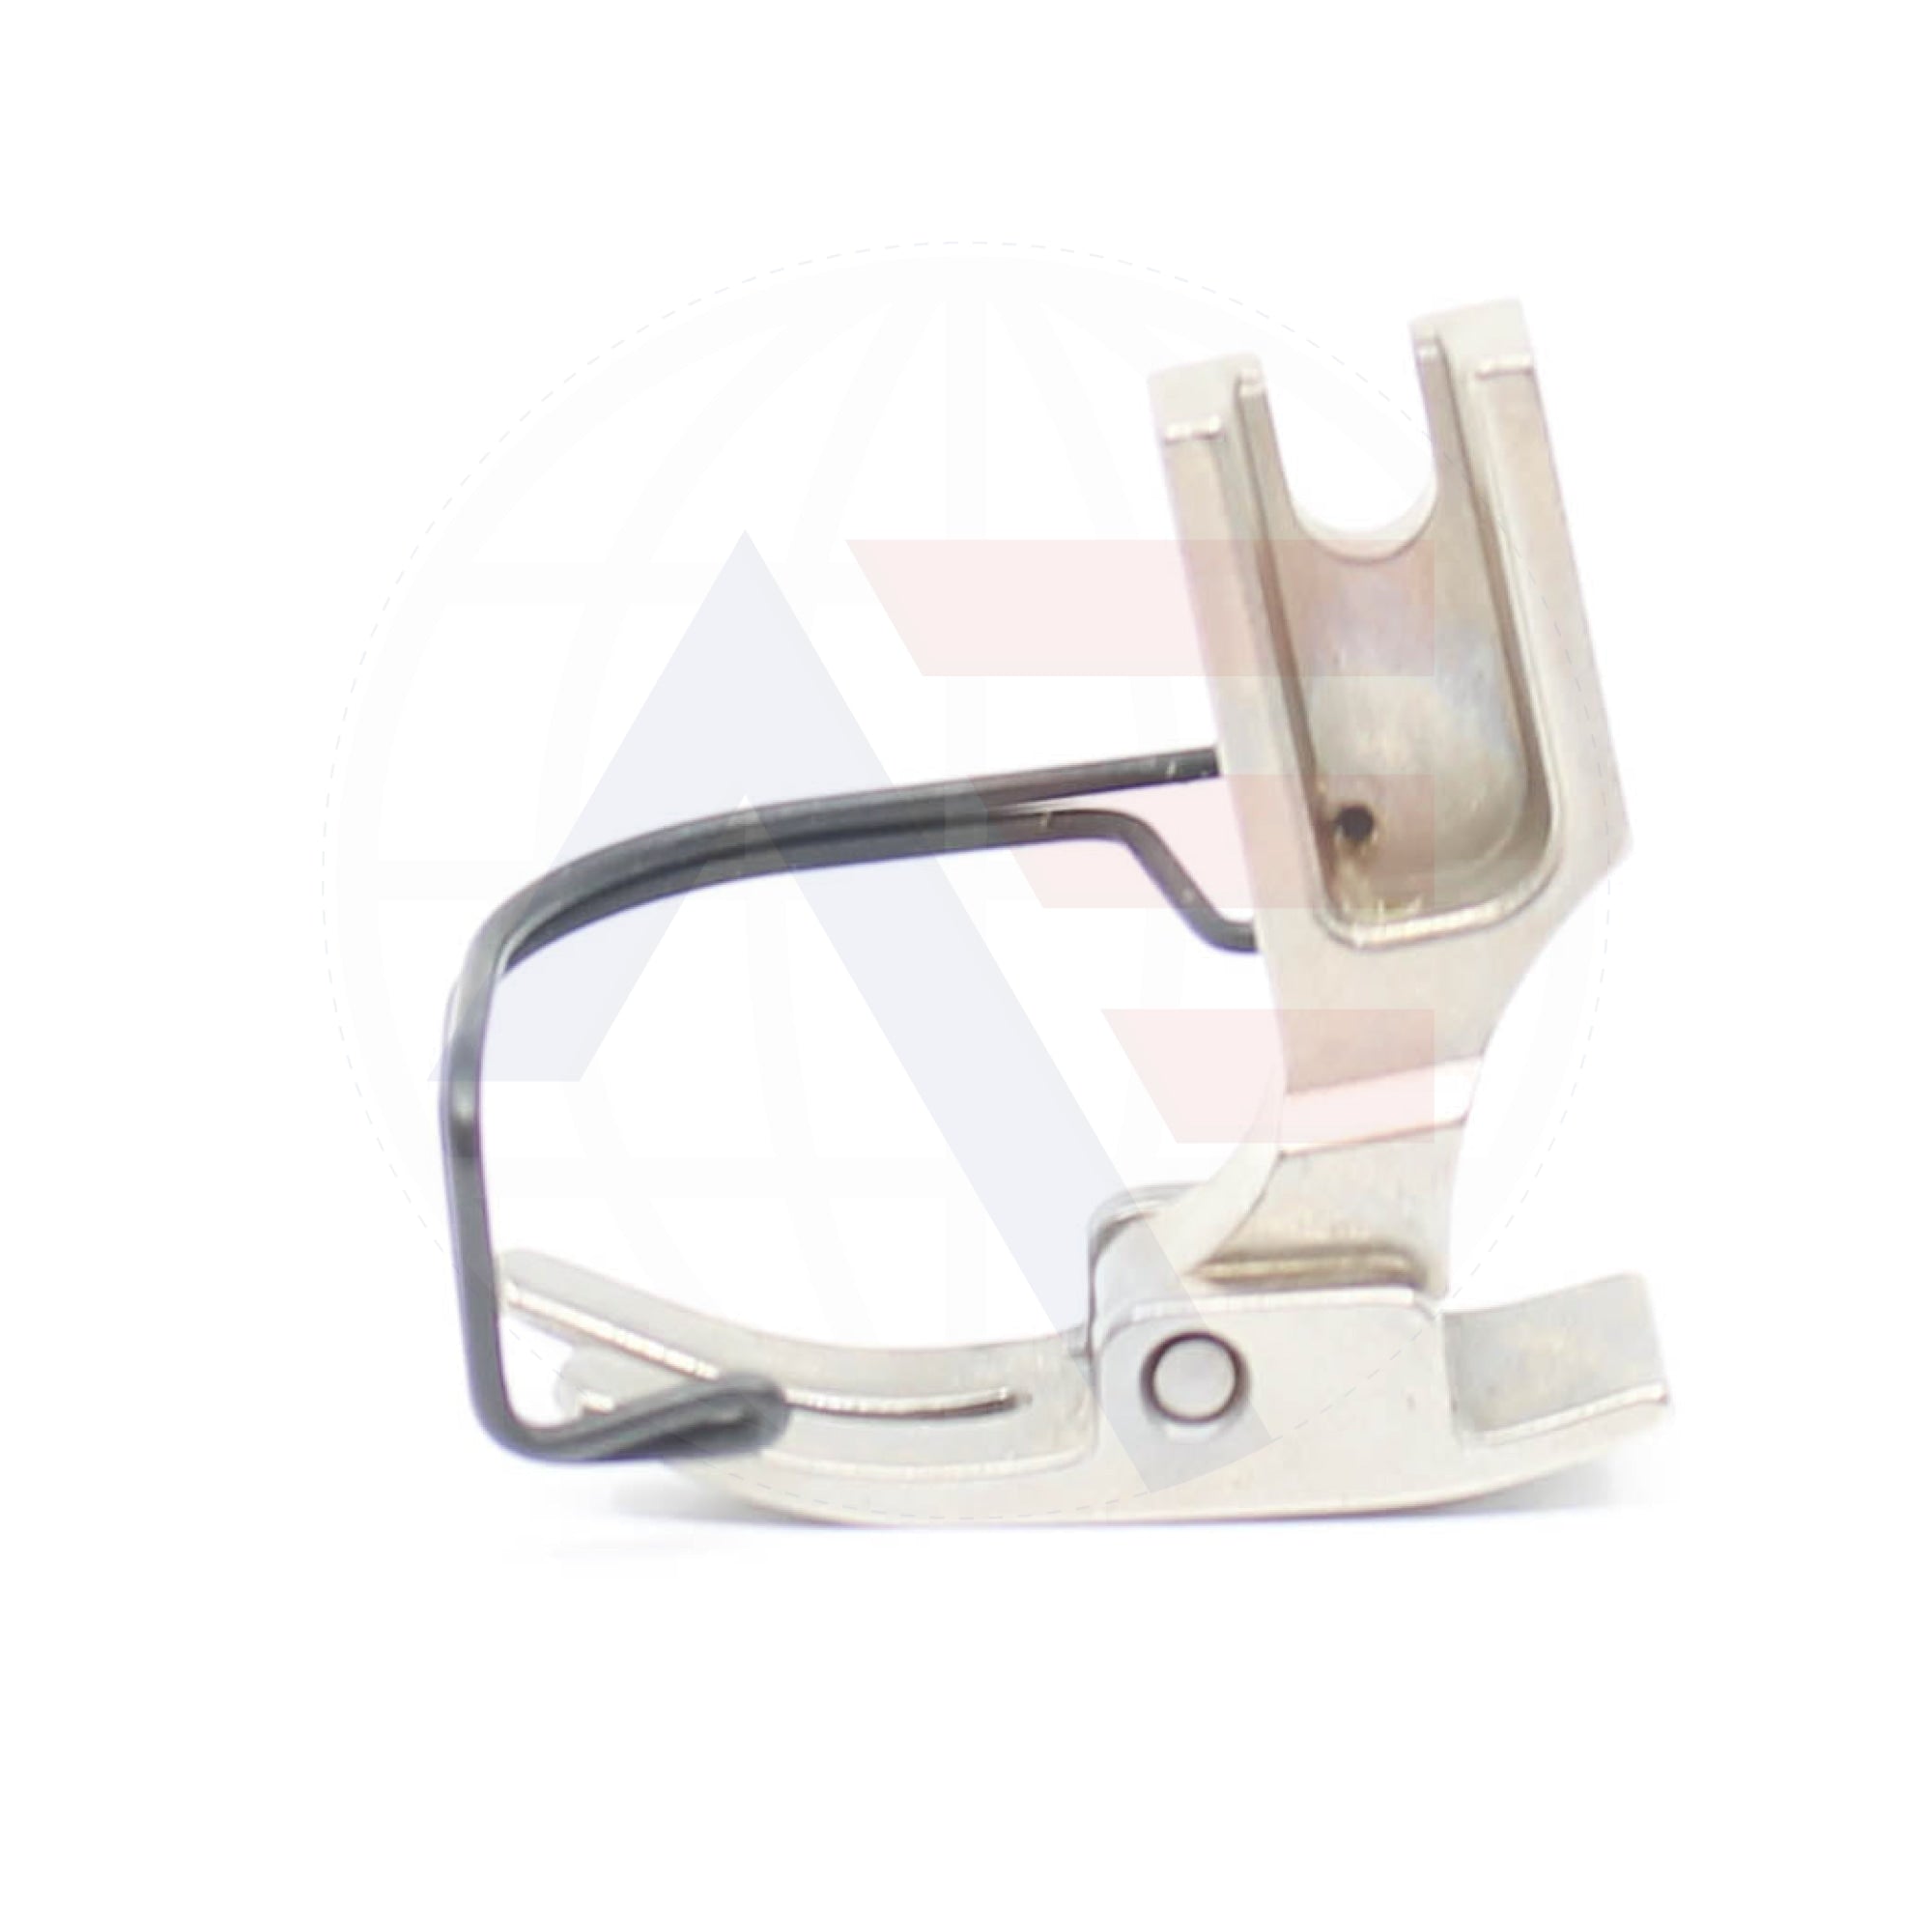 B15240120Ba Presser Foot With Finger Guard Sewing Machine Spare Parts